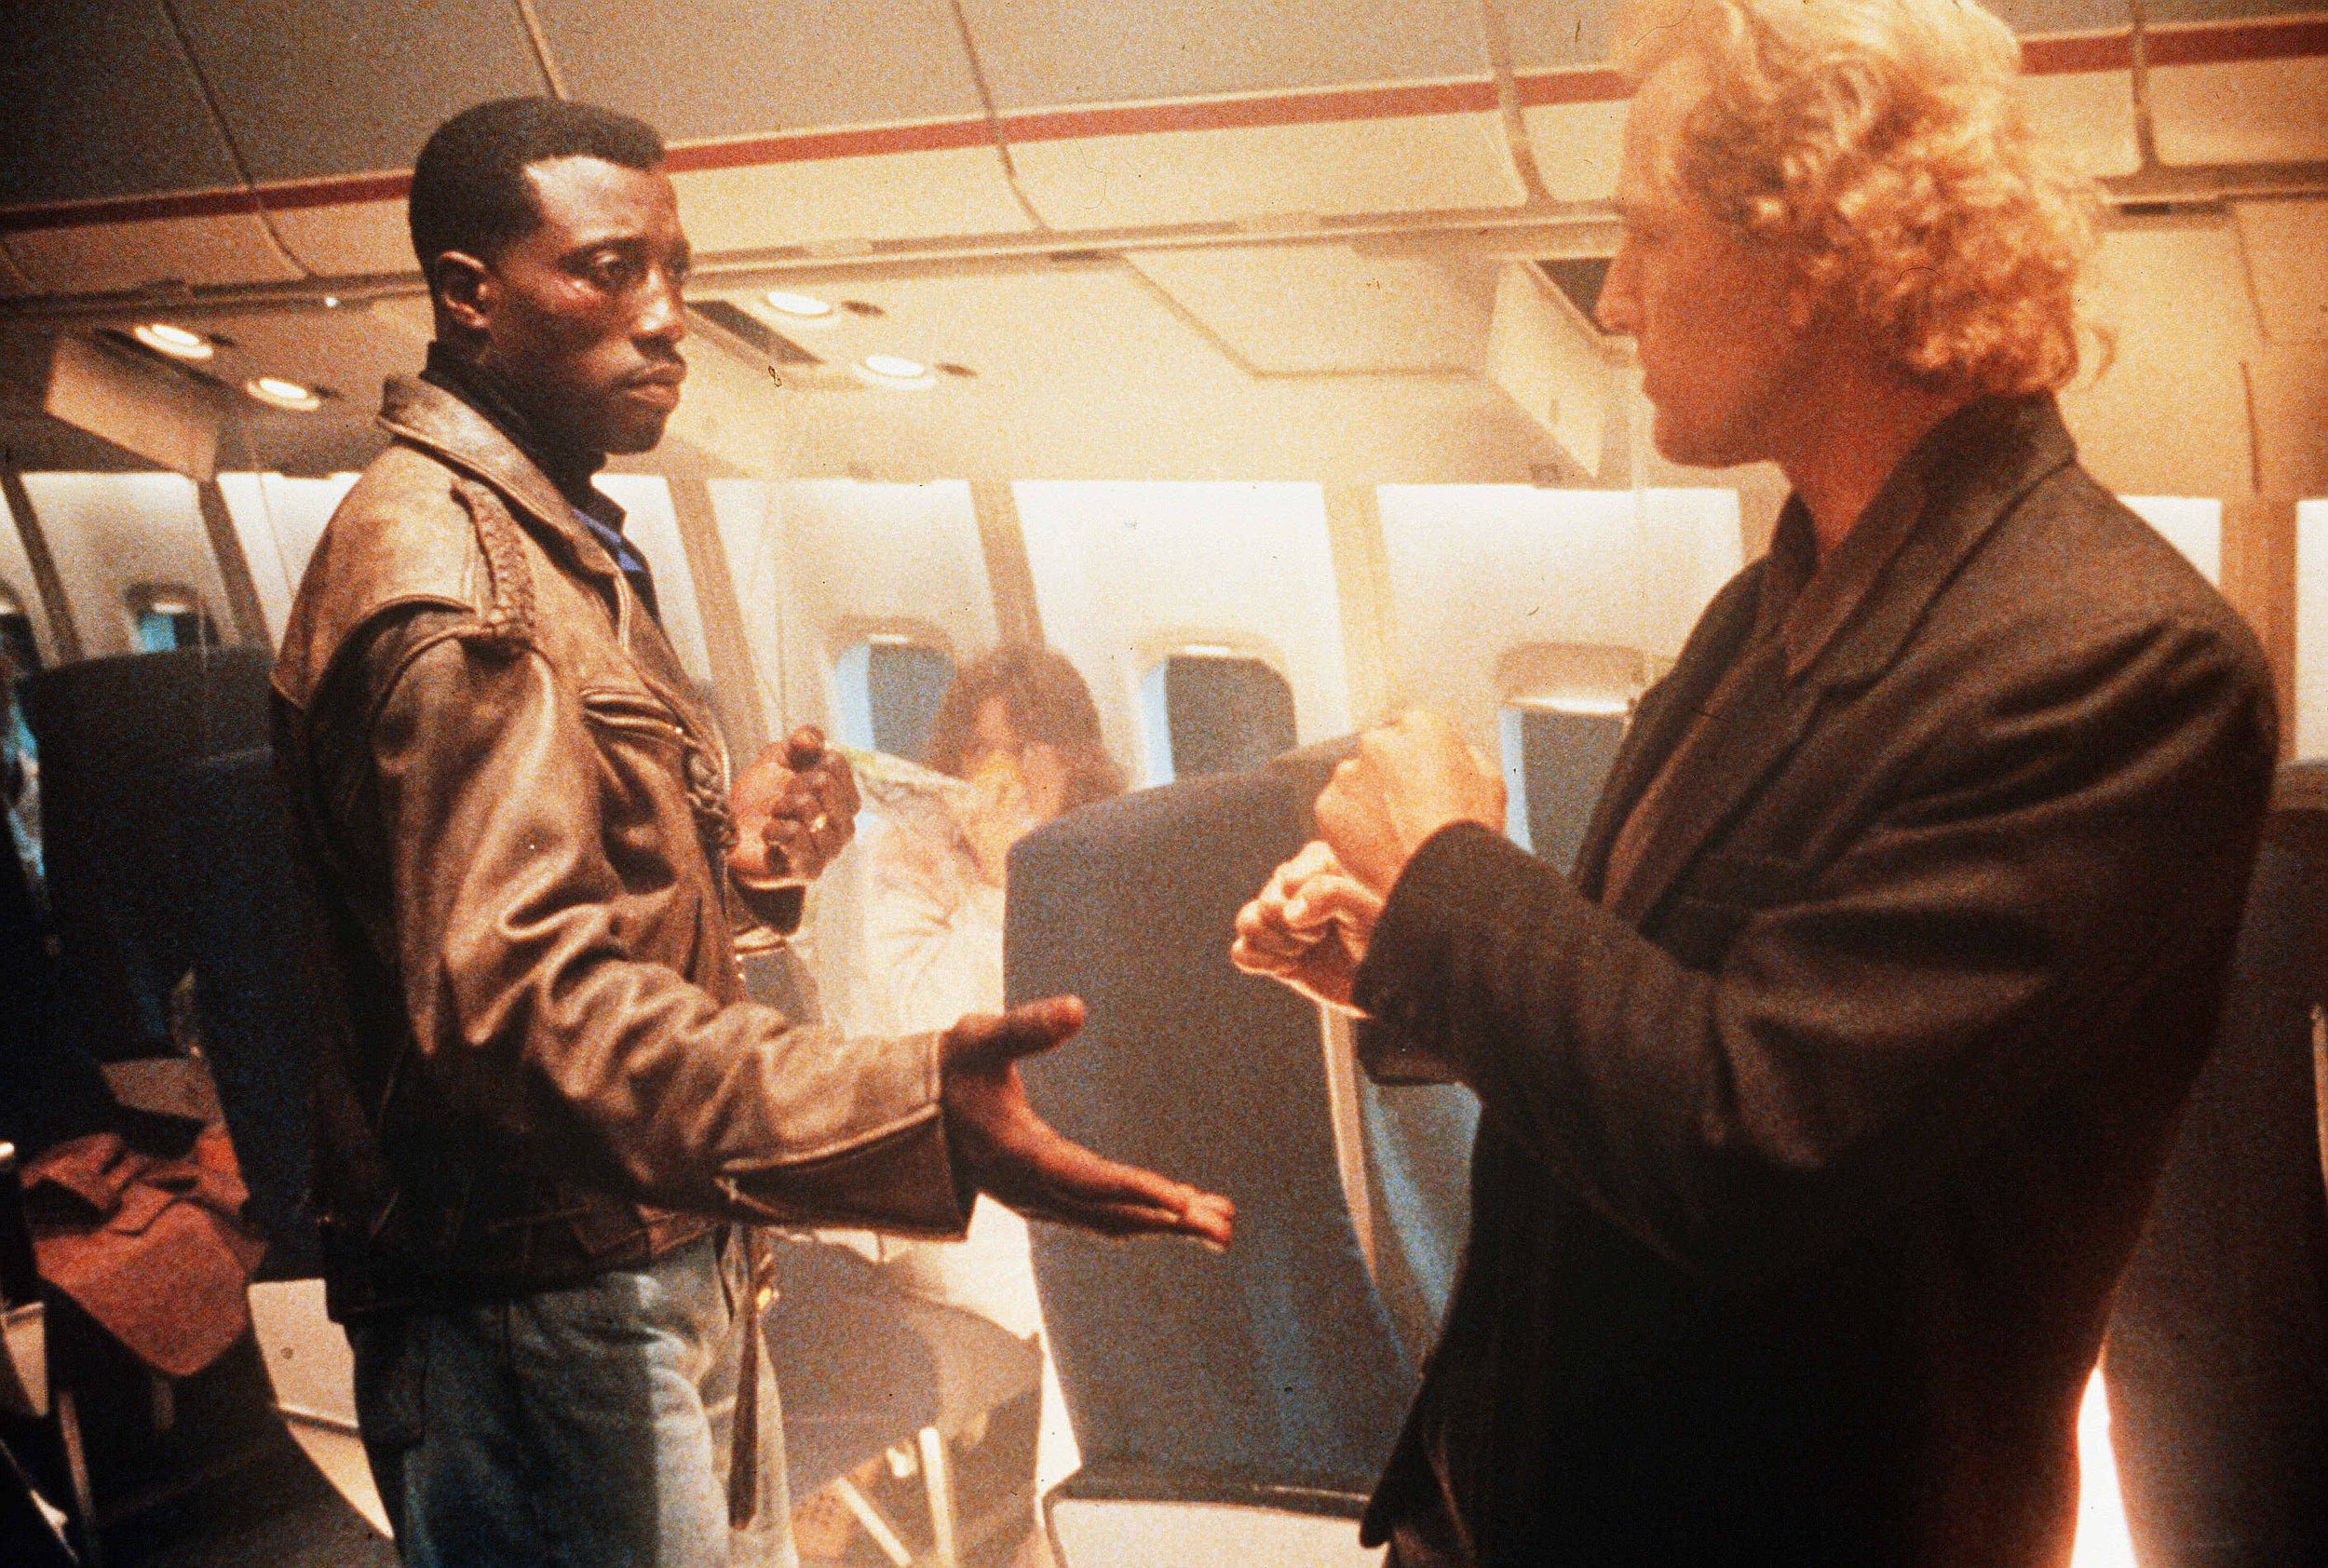 <p>This is the second Wesley Snipes film on the list. He was a massive action star in the ‘90s, whether on a train or a plane. “Passenger 57” is kind of like a smaller-scale “Con Air” without the wilder elements. Snipes plays a guy who has been a soldier, a cop, and a Secret Service agent who just so happens to be on the same flight as…the world’s most infamous terrorist who is being transported for trial? Sure, why not?</p><p>You may also like: <a href='https://www.yardbarker.com/entertainment/articles/20_movies_you_might_not_know_that_were_adapted_from_books/s1__38836882'>20 movies you might not know that were adapted from books</a></p>